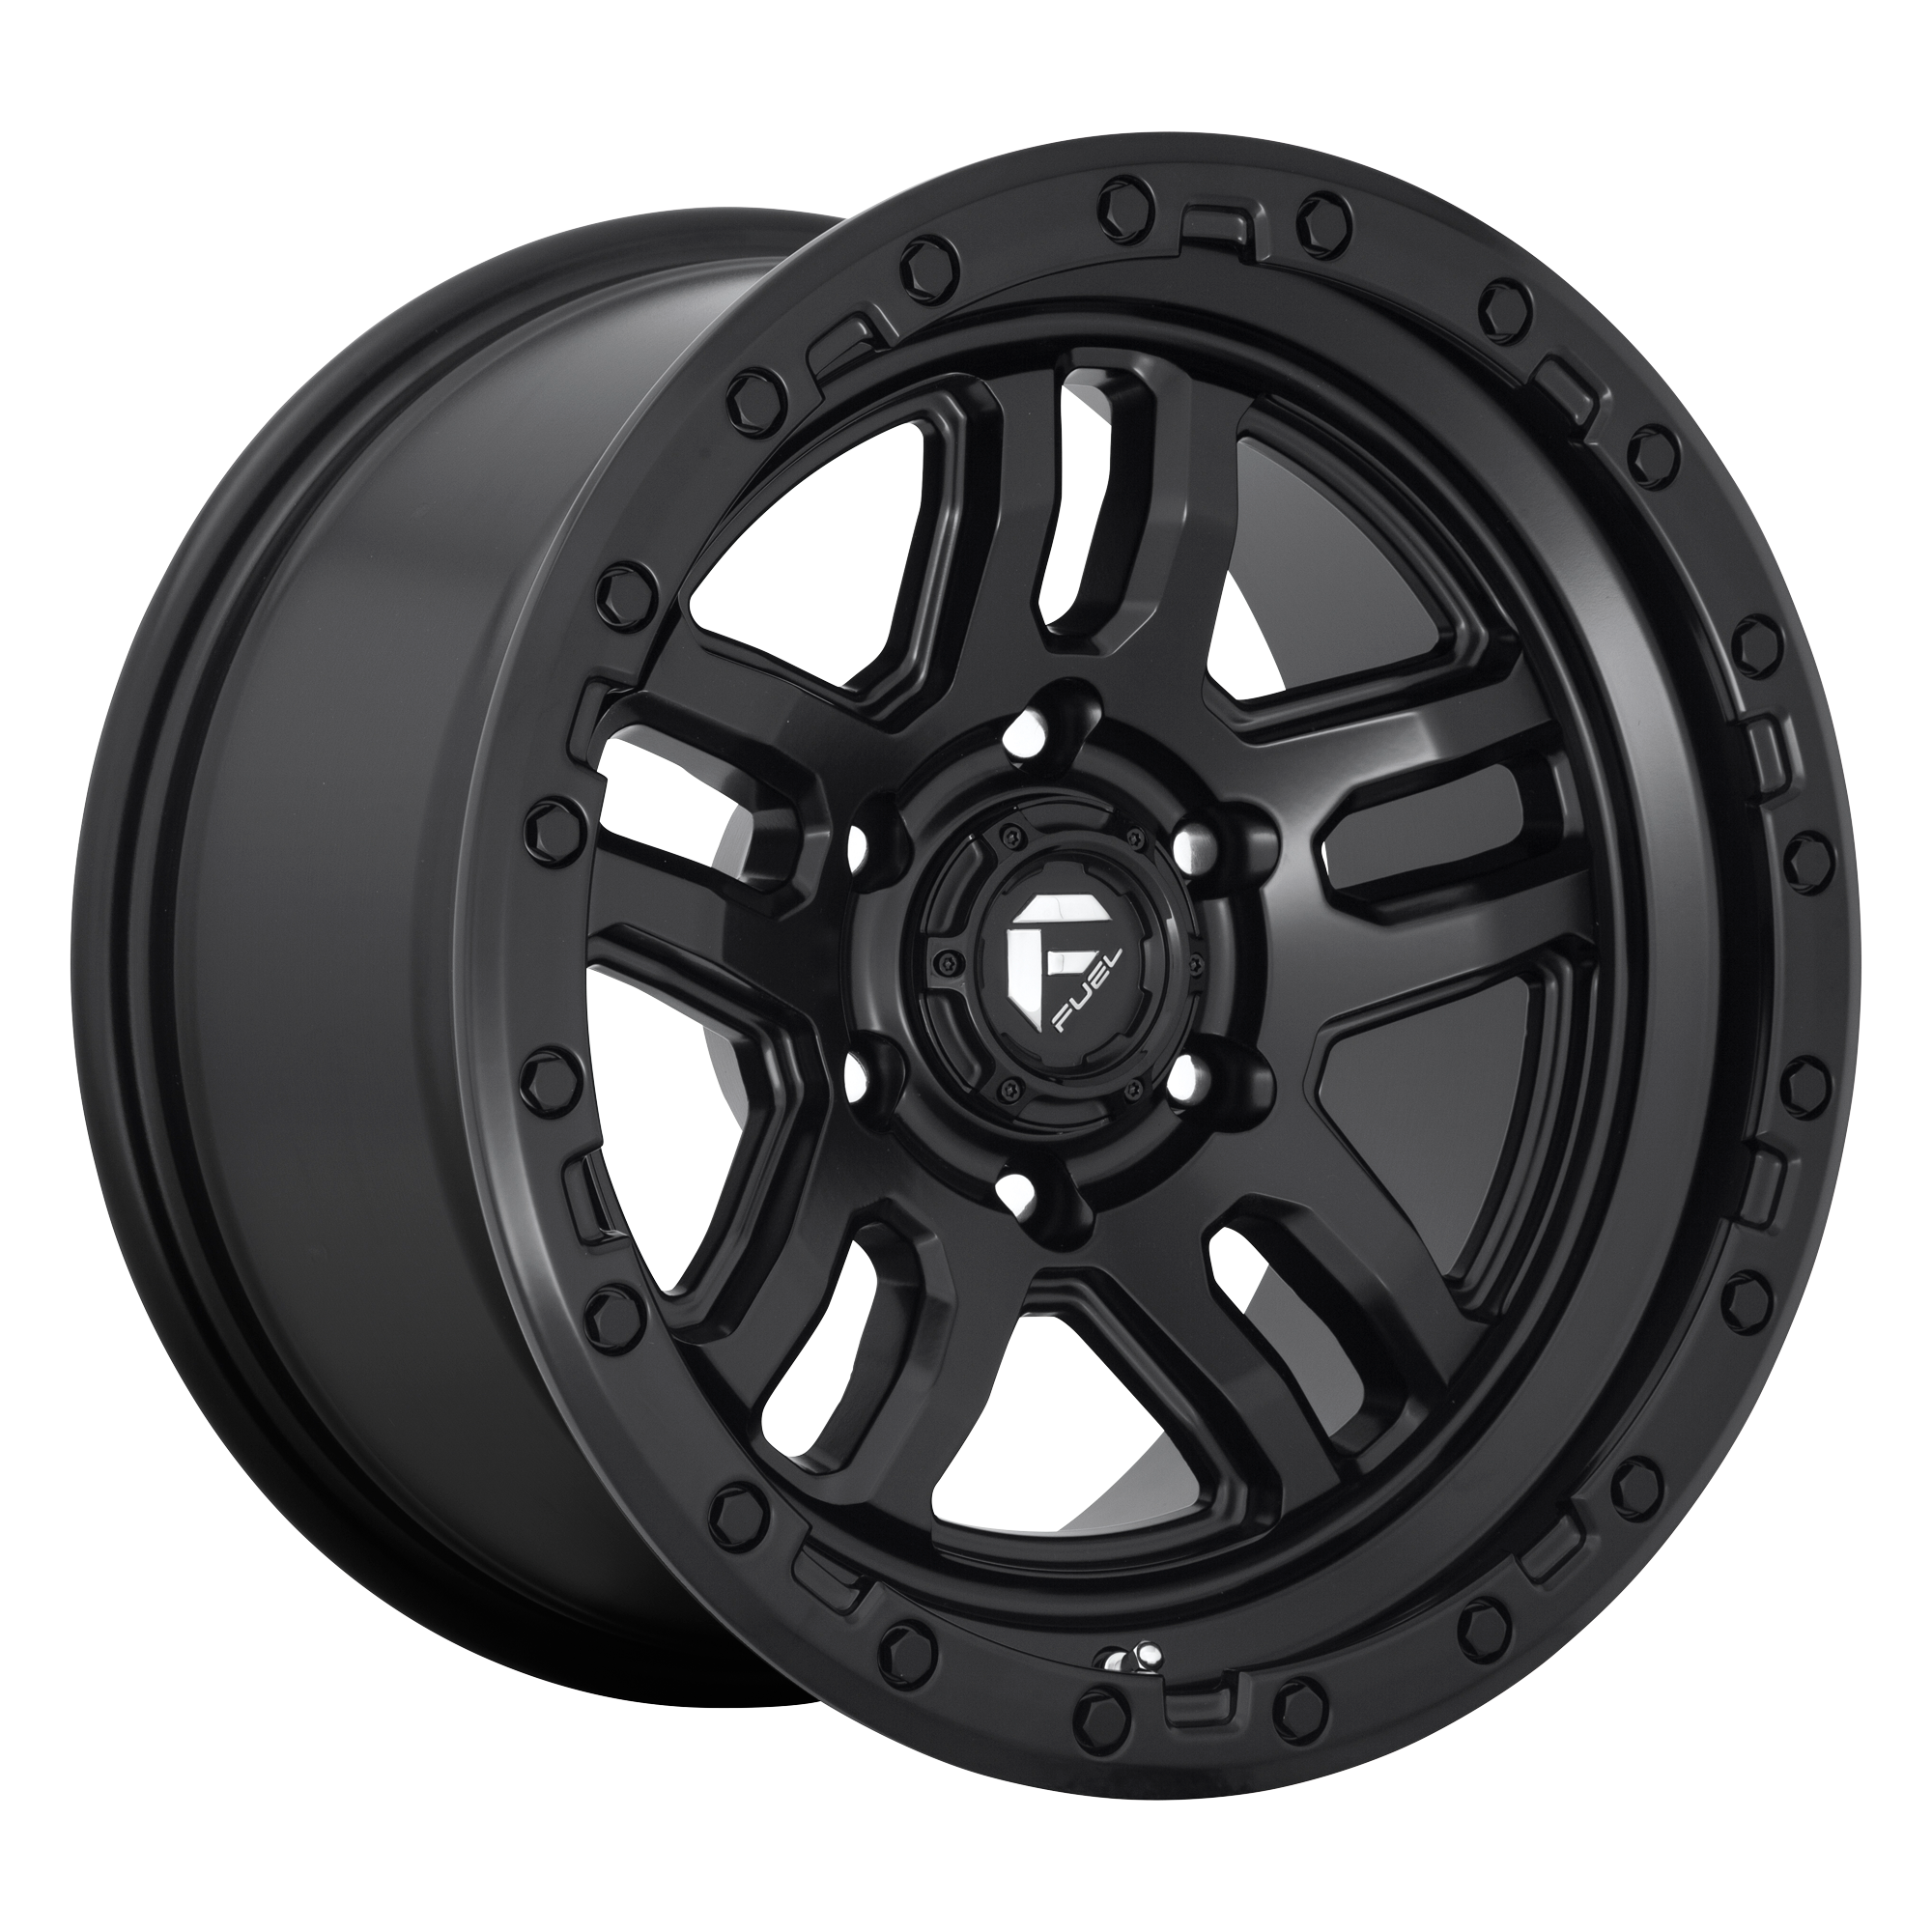 AMMO 20x9 5x150.00 MATTE BLACK (20 mm) - Tires and Engine Performance